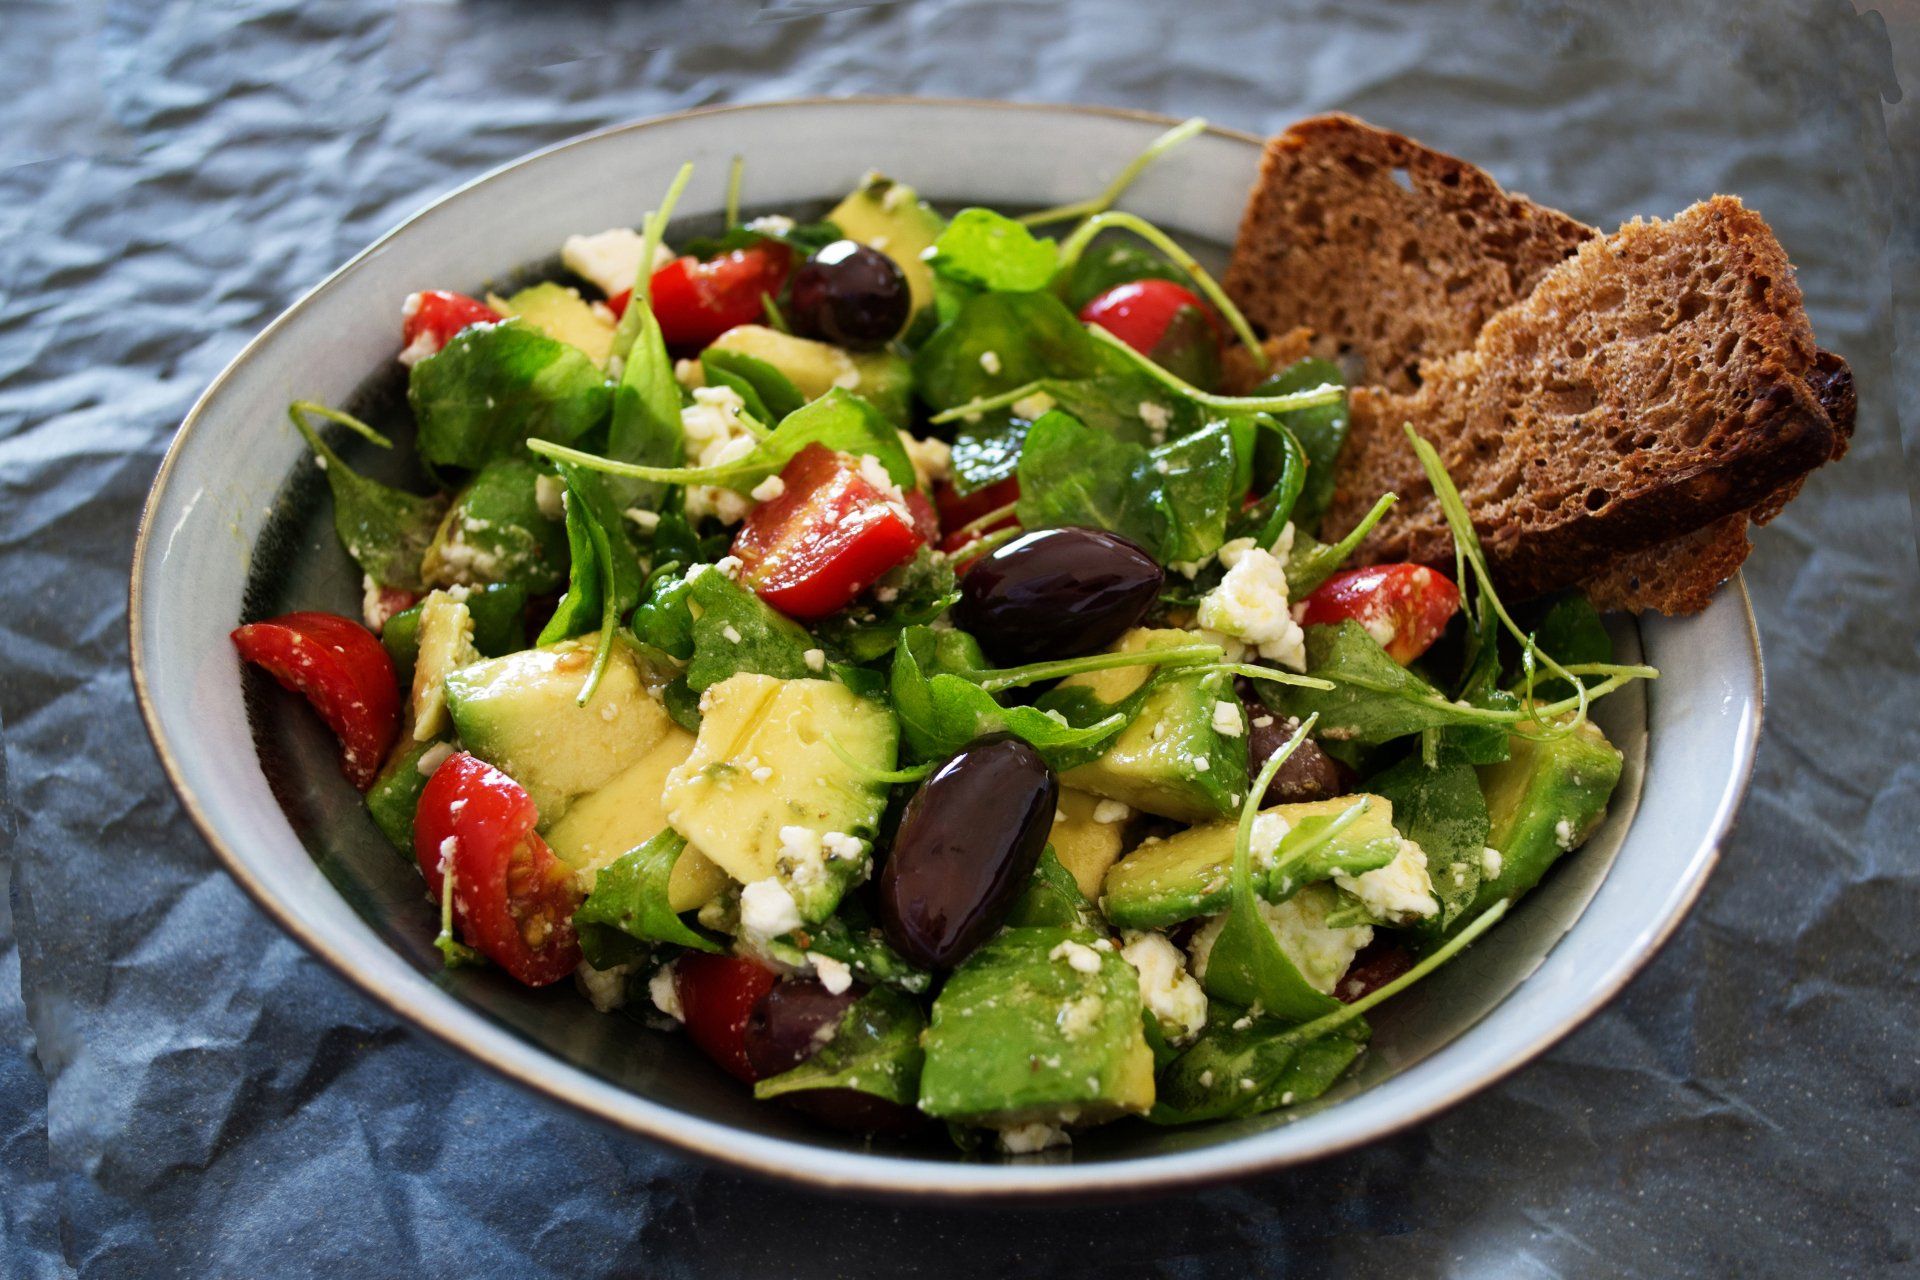 Greek Salad with black olives and feta, avocado, great lunch or snack idea!